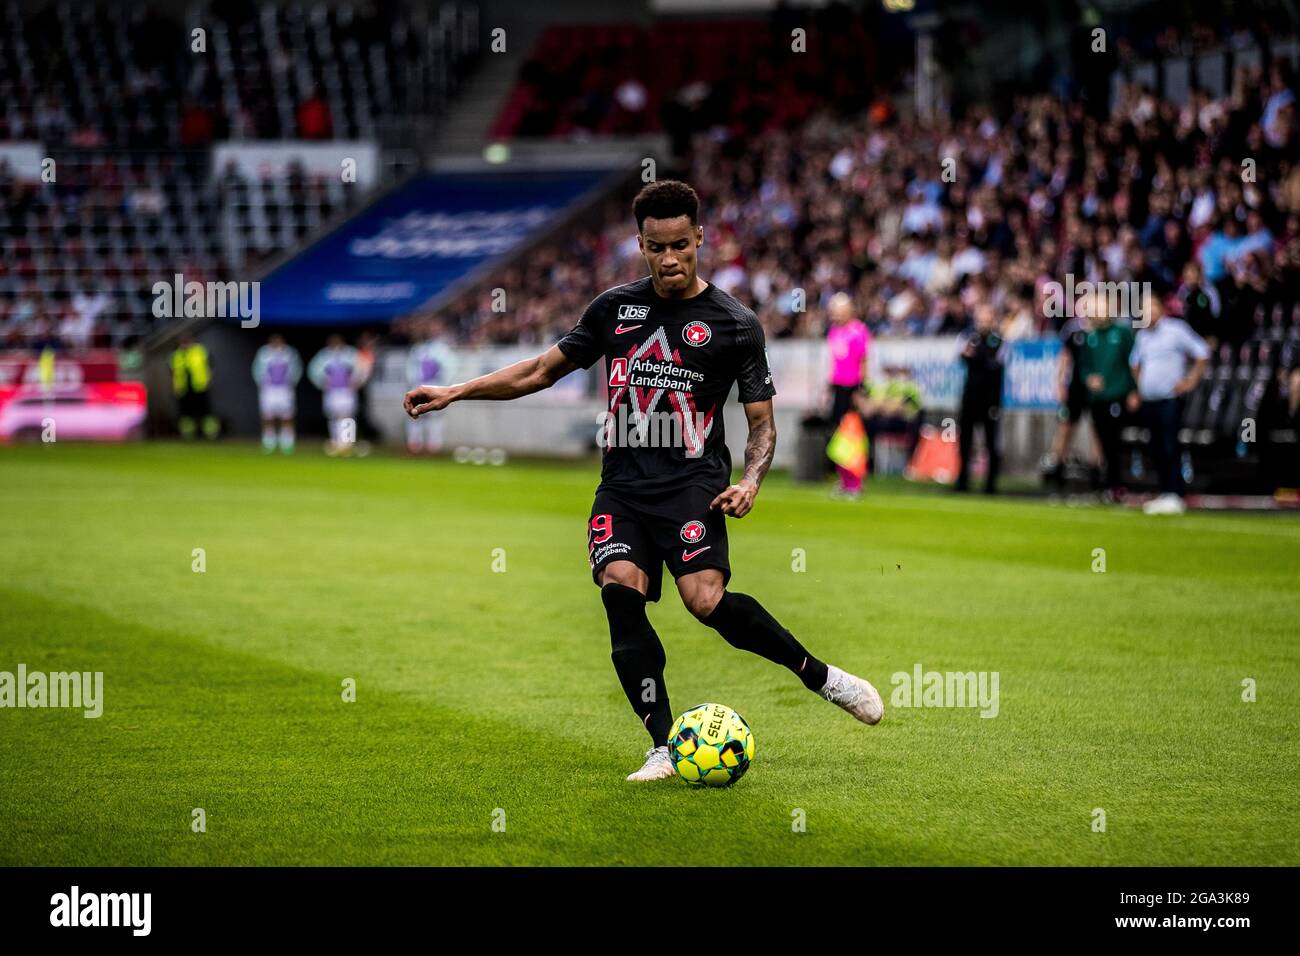 mandig Eastern Fortrolig Herning, Denmark. 28th July, 2021. Paulinho (29) of FC Midtjylland seen  during the UEFA Champions League qualification match between FC Midtjylland  and Celtic at MCH Arena in Herning. (Photo Credit: Gonzales Photo/Alamy